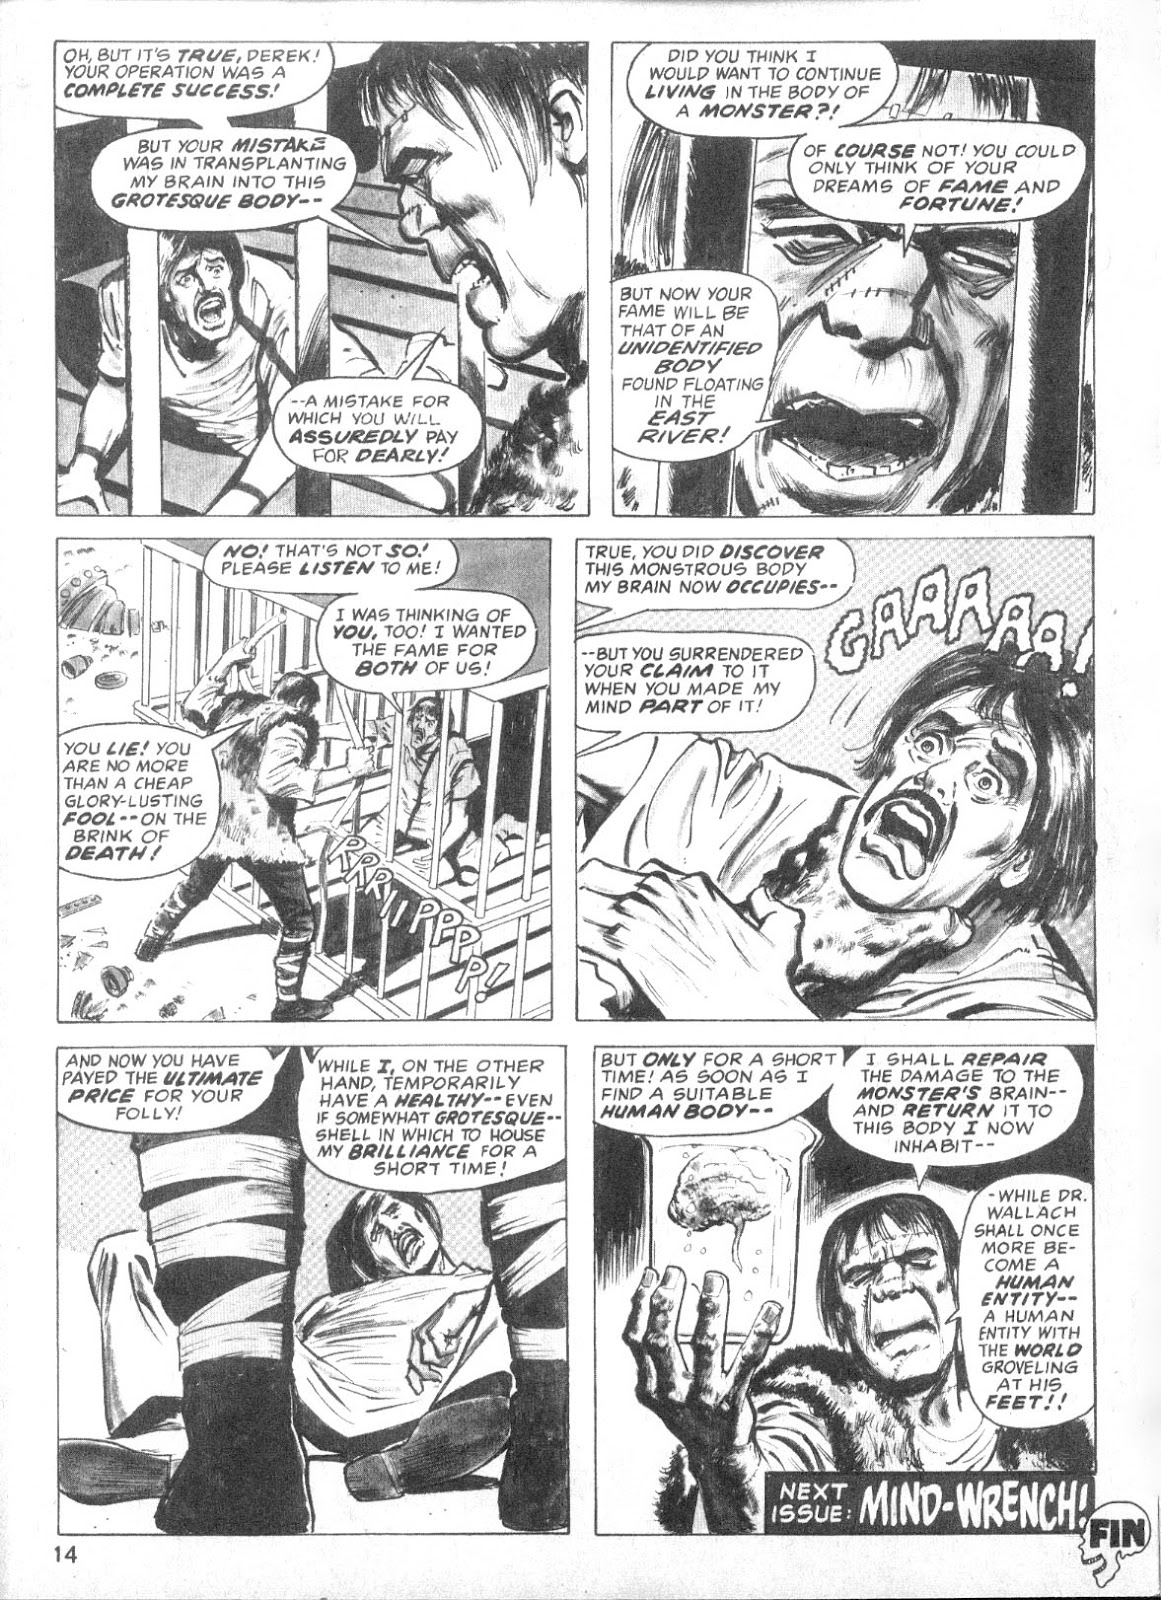 Monsters Unleashed (1973) issue 4 - Page 15